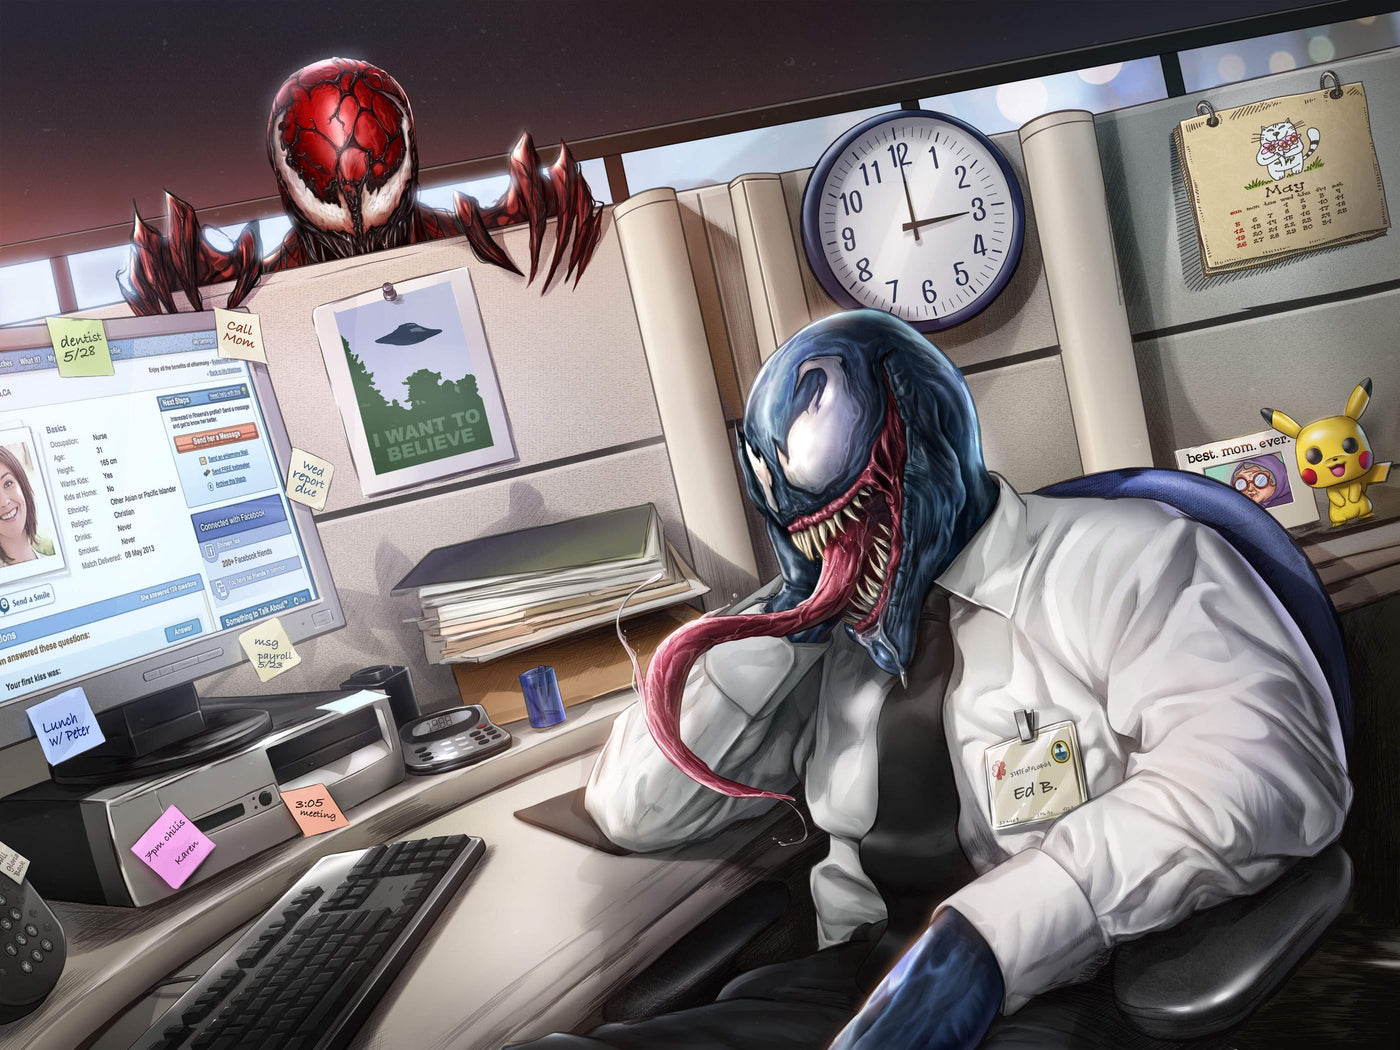 Venomous Workplace by Dominic Glover